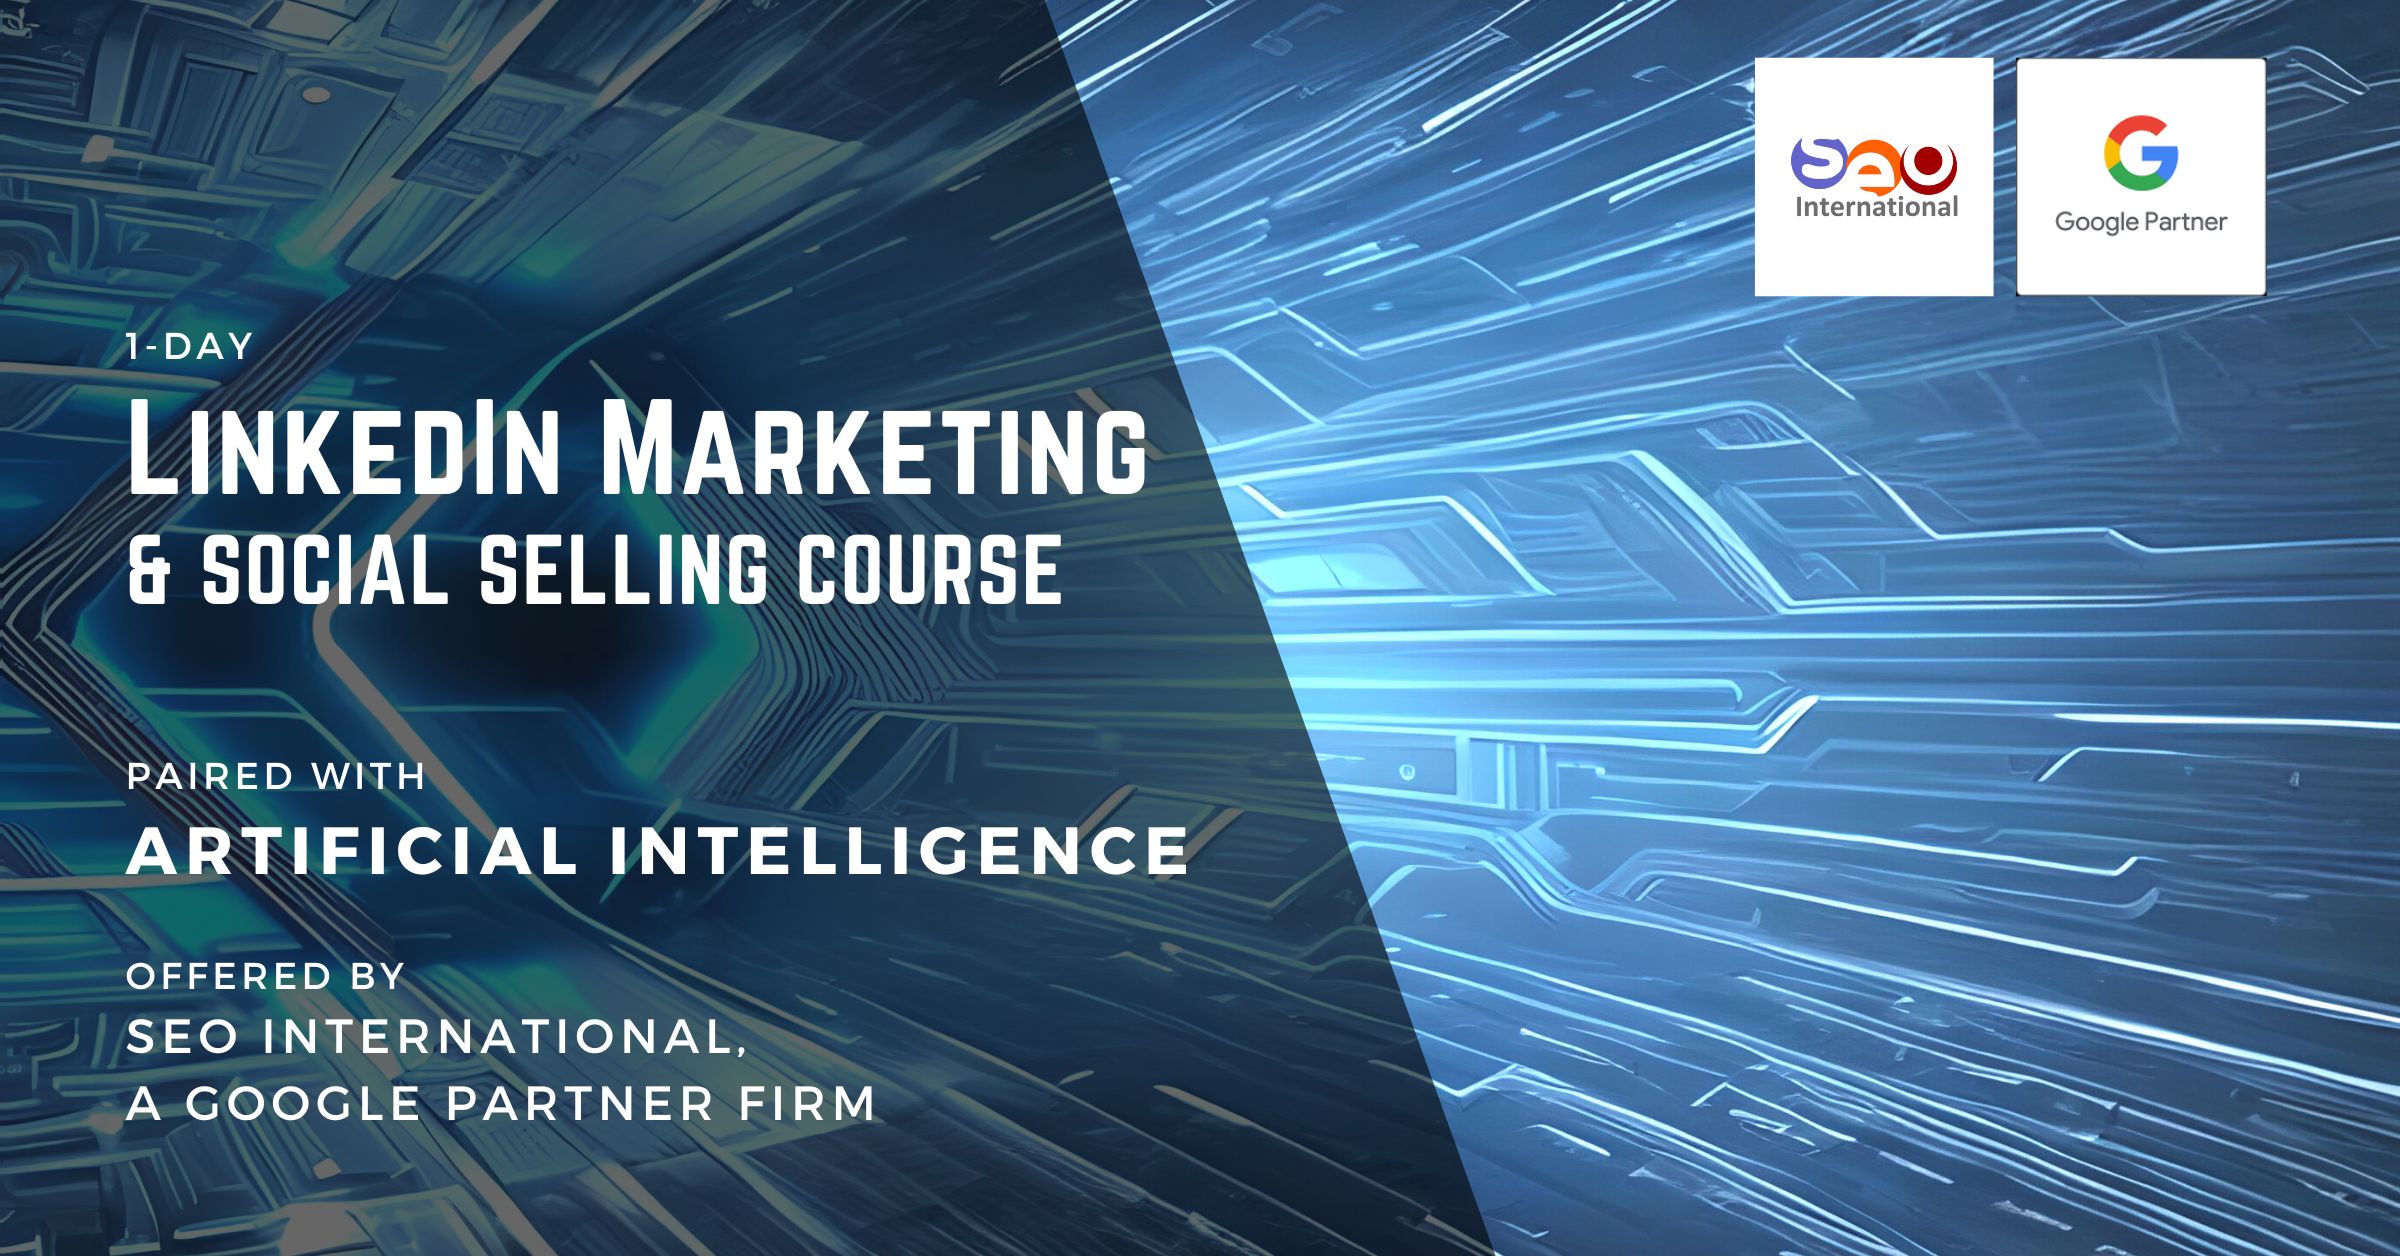 LinkedIn Marketing, AI, and Social Selling Course